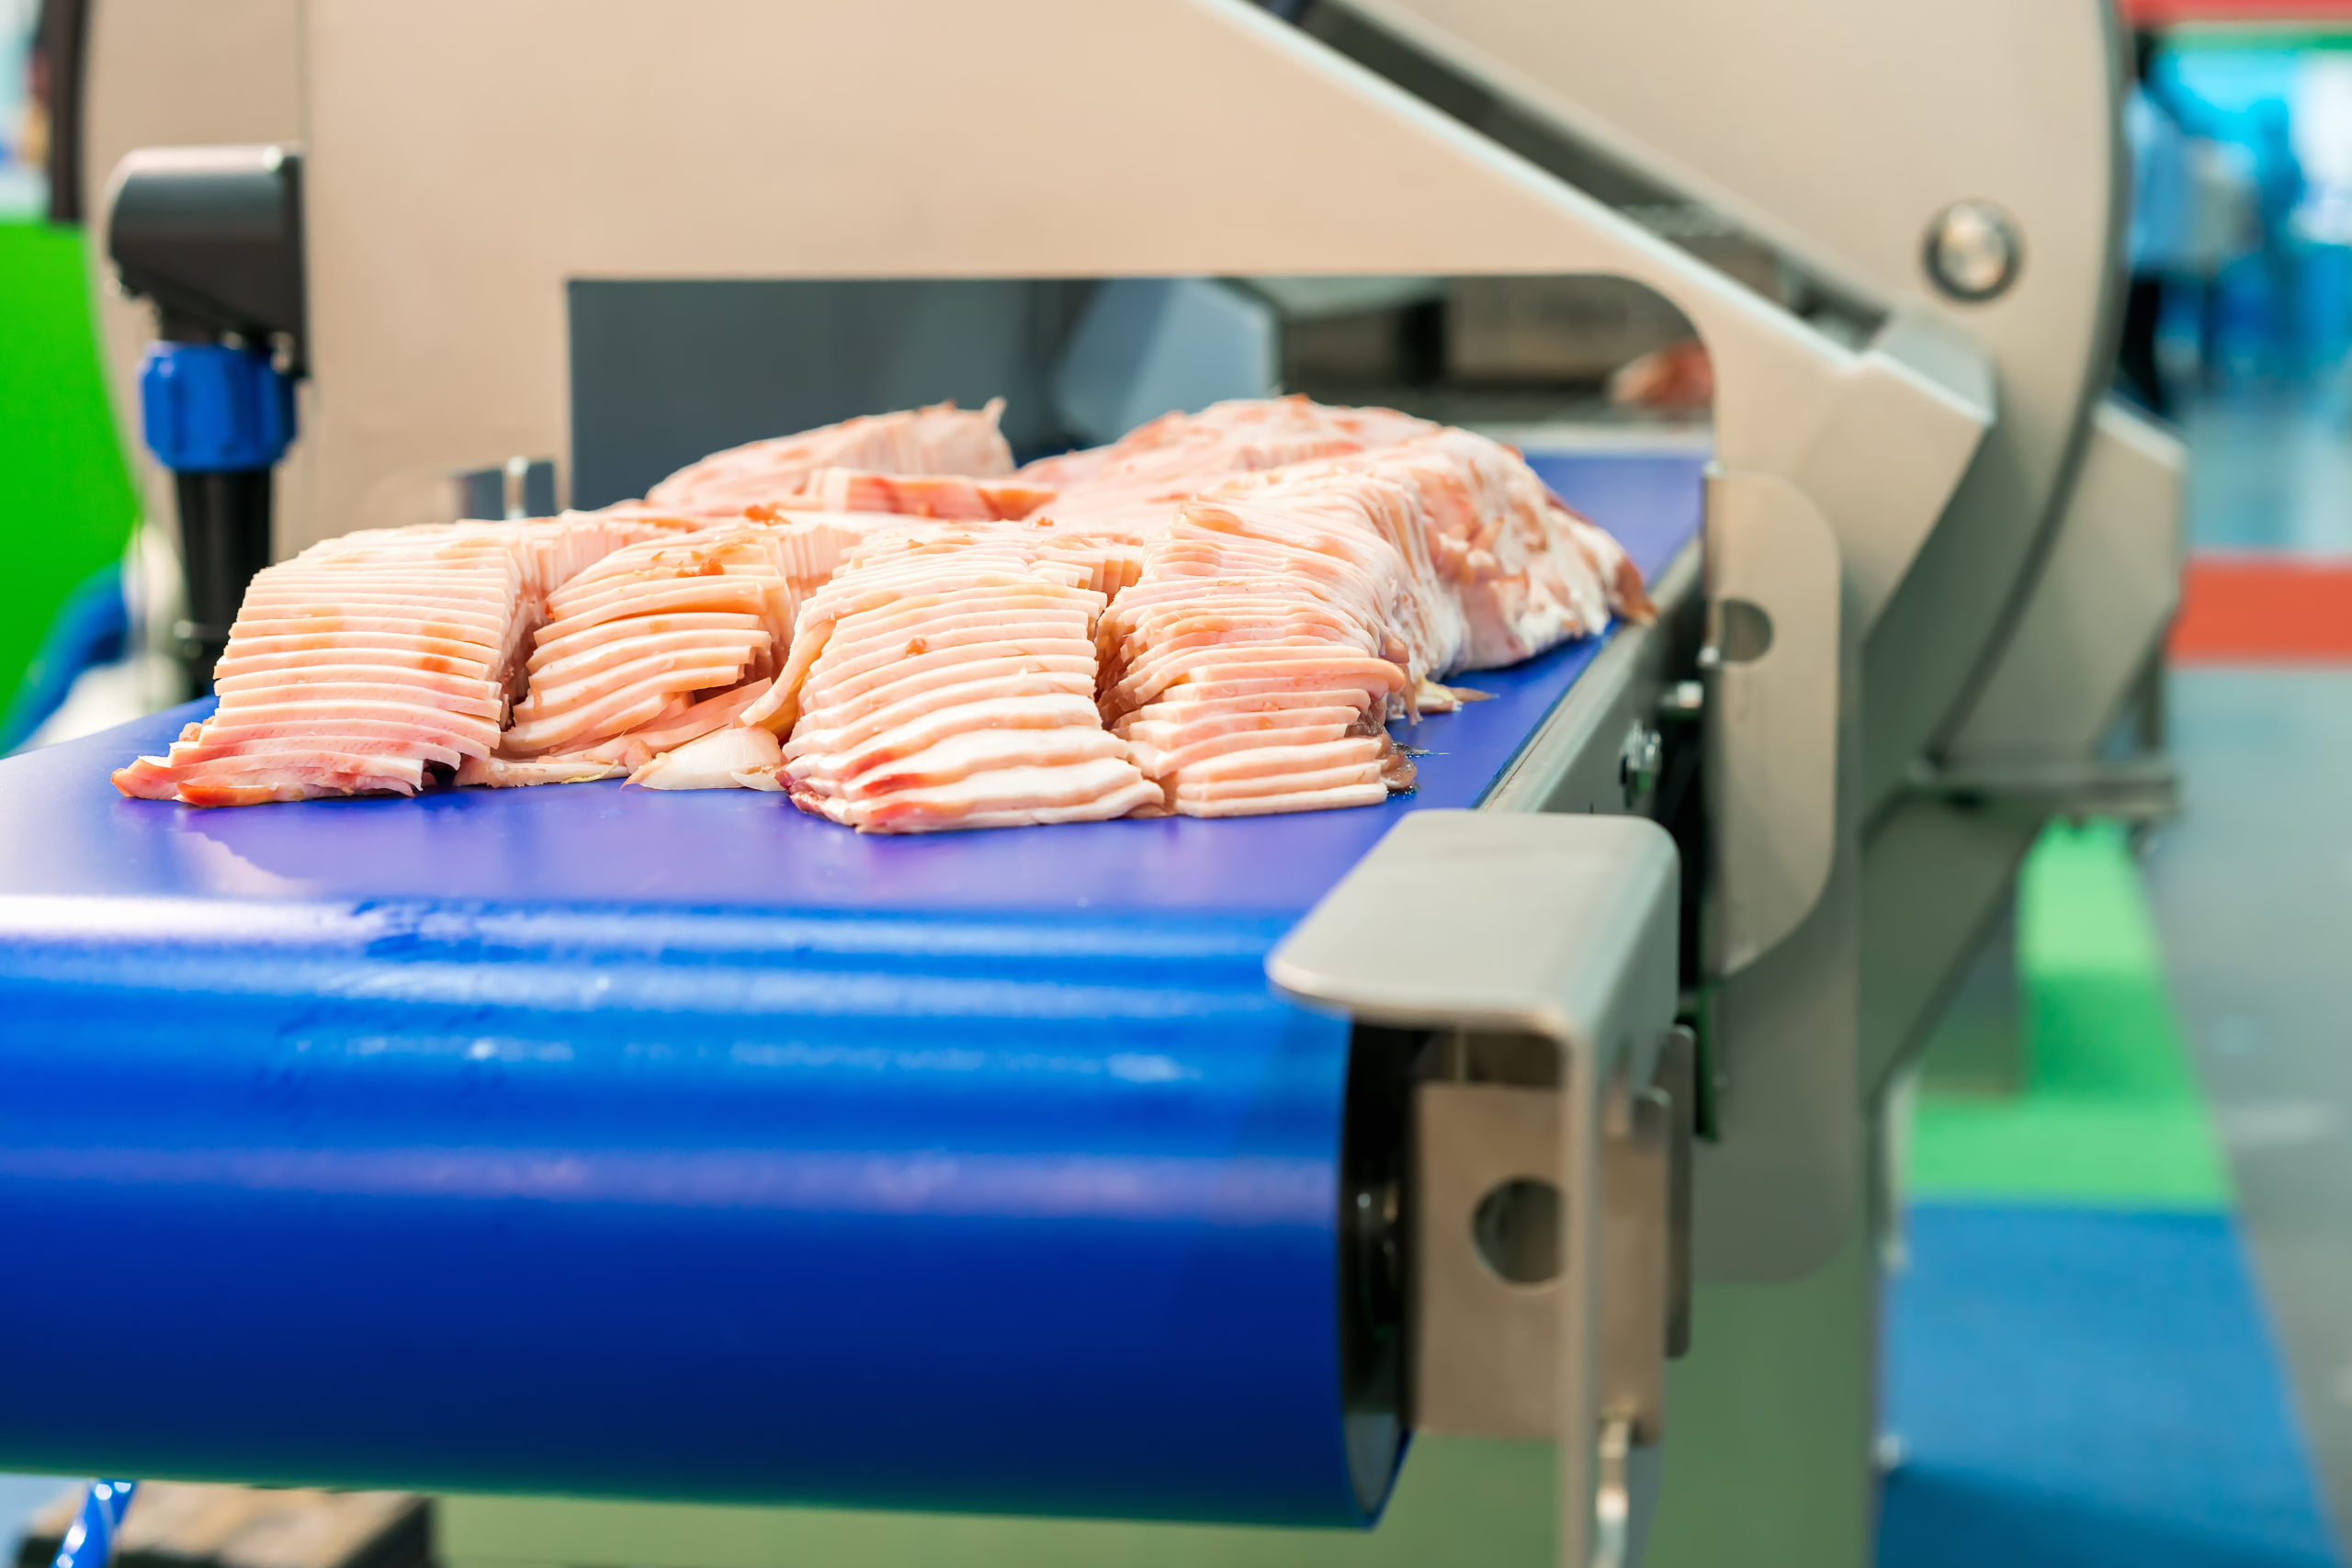 Close up pork or meat sliced on conveyor of automatic and precision slicer machine for industrial food manufacture